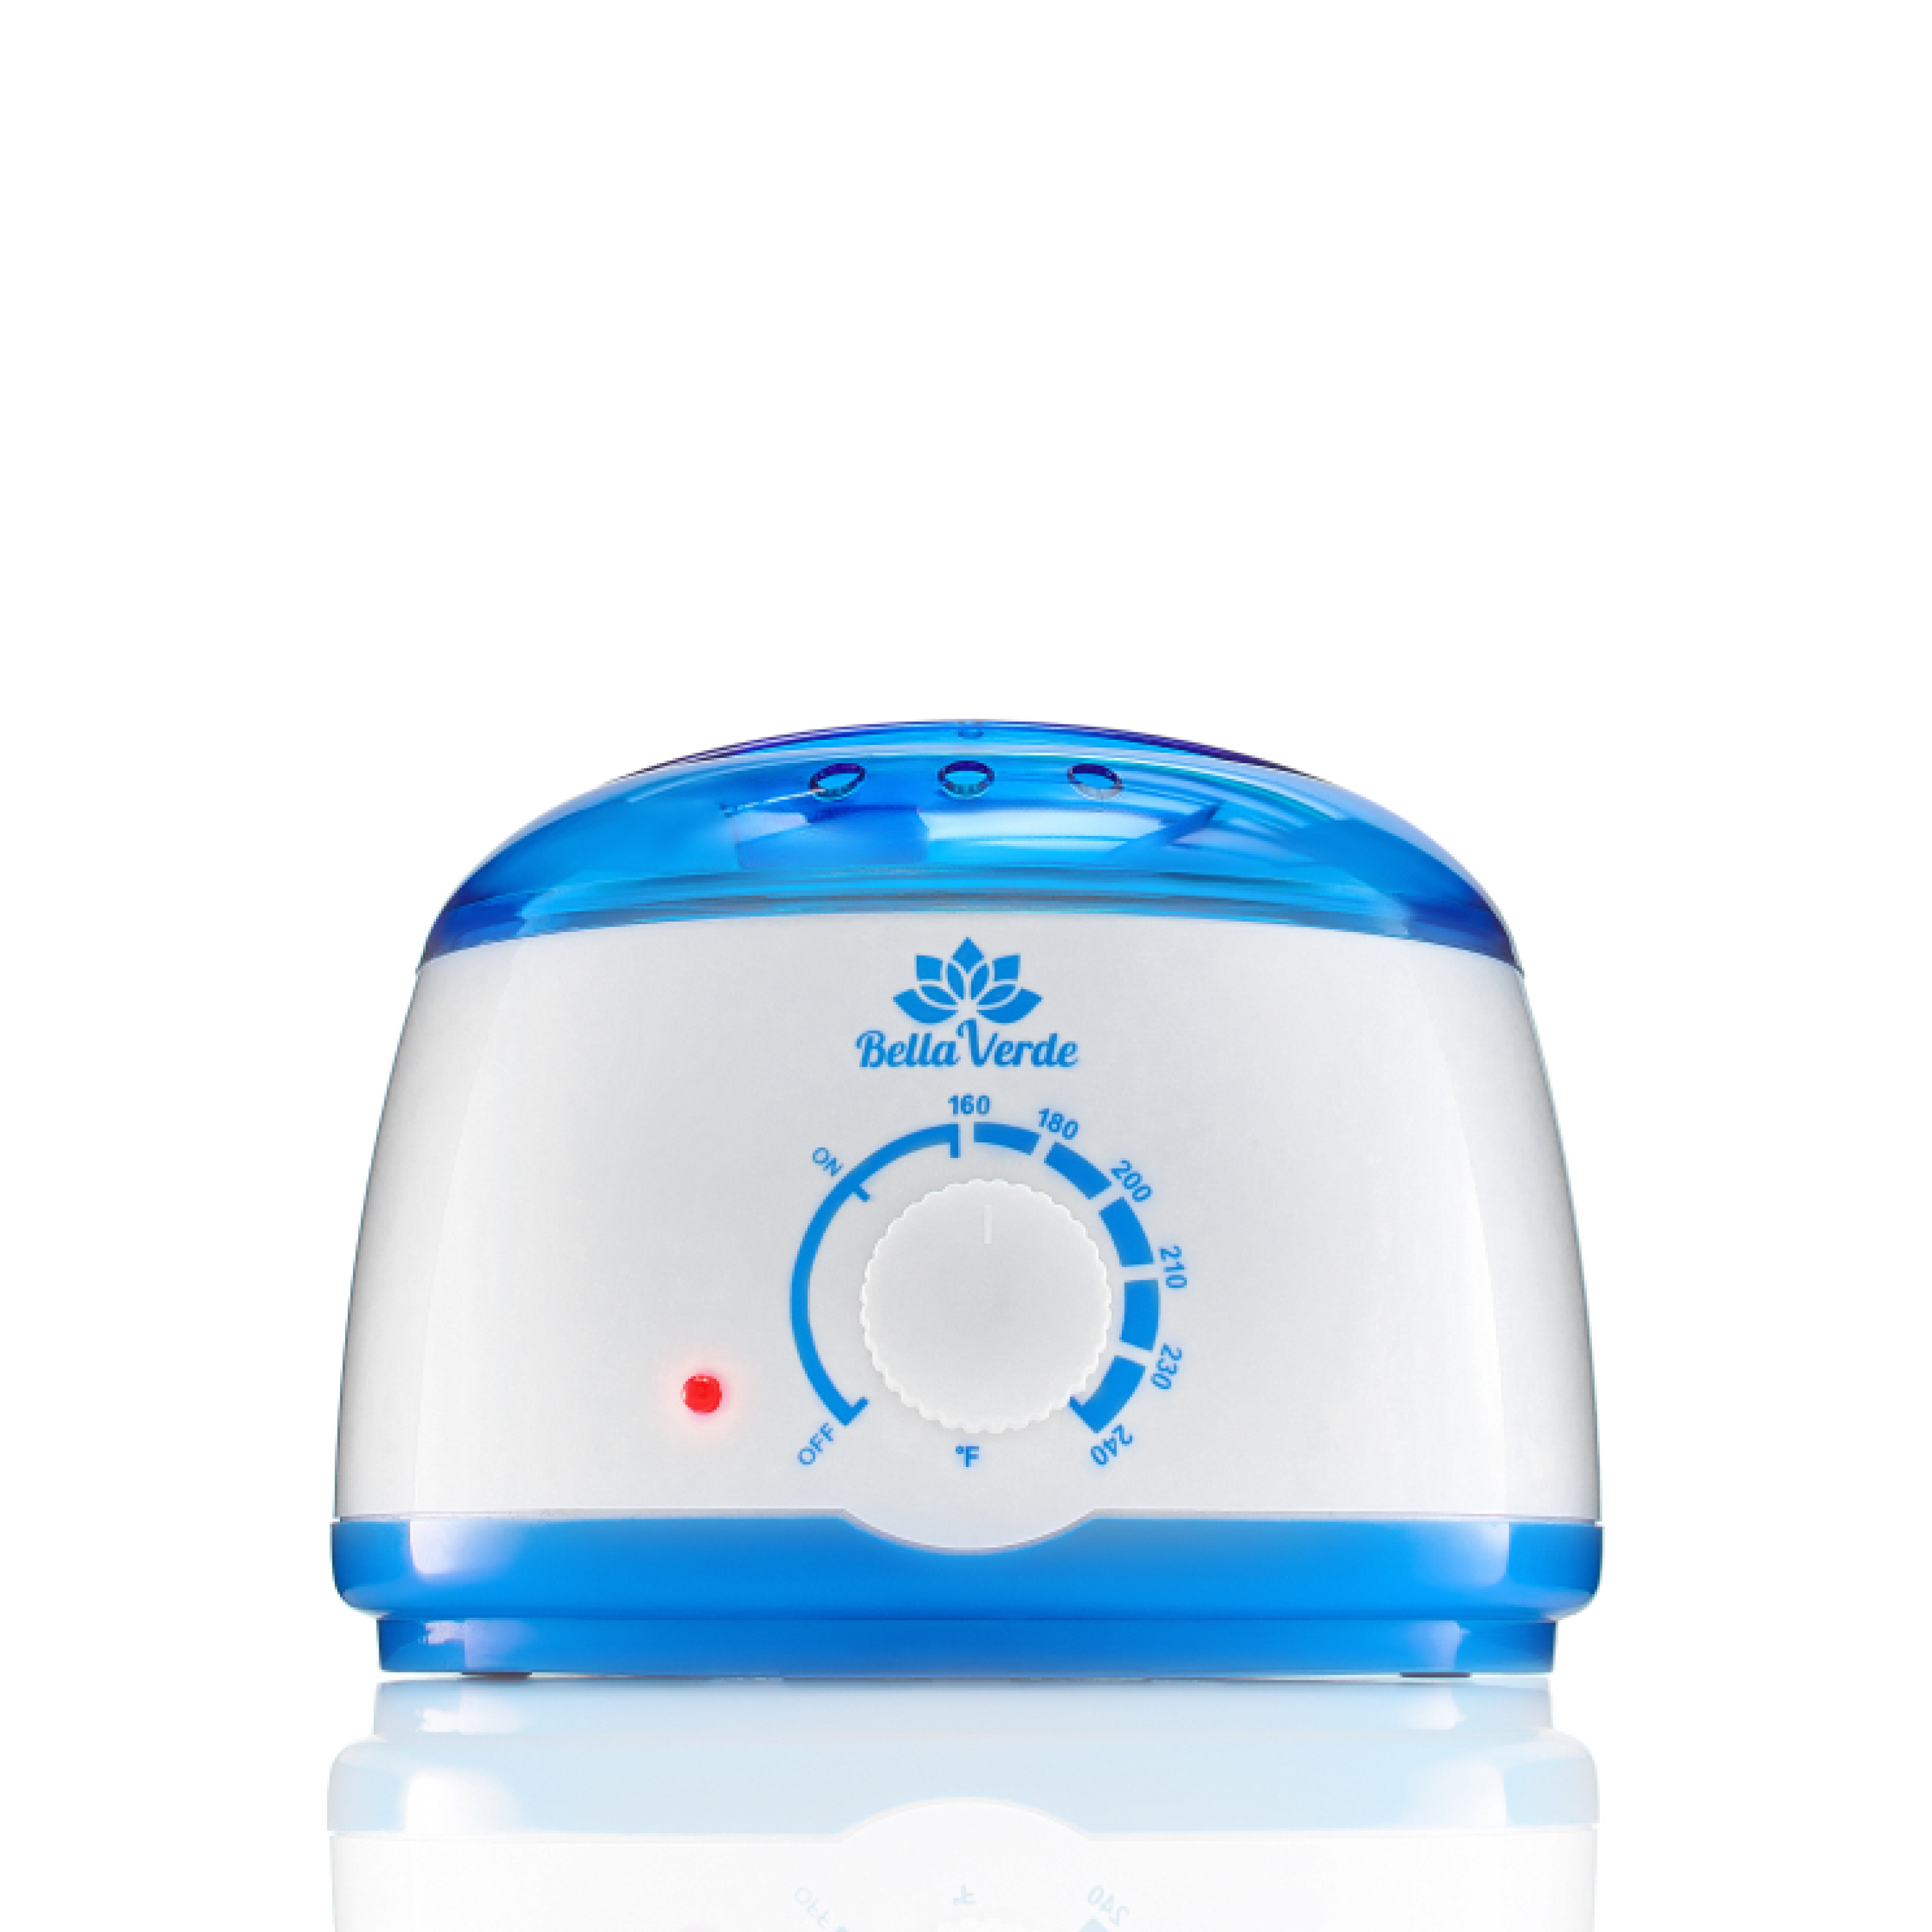 Wax Warmer With a Manual Temperature Control